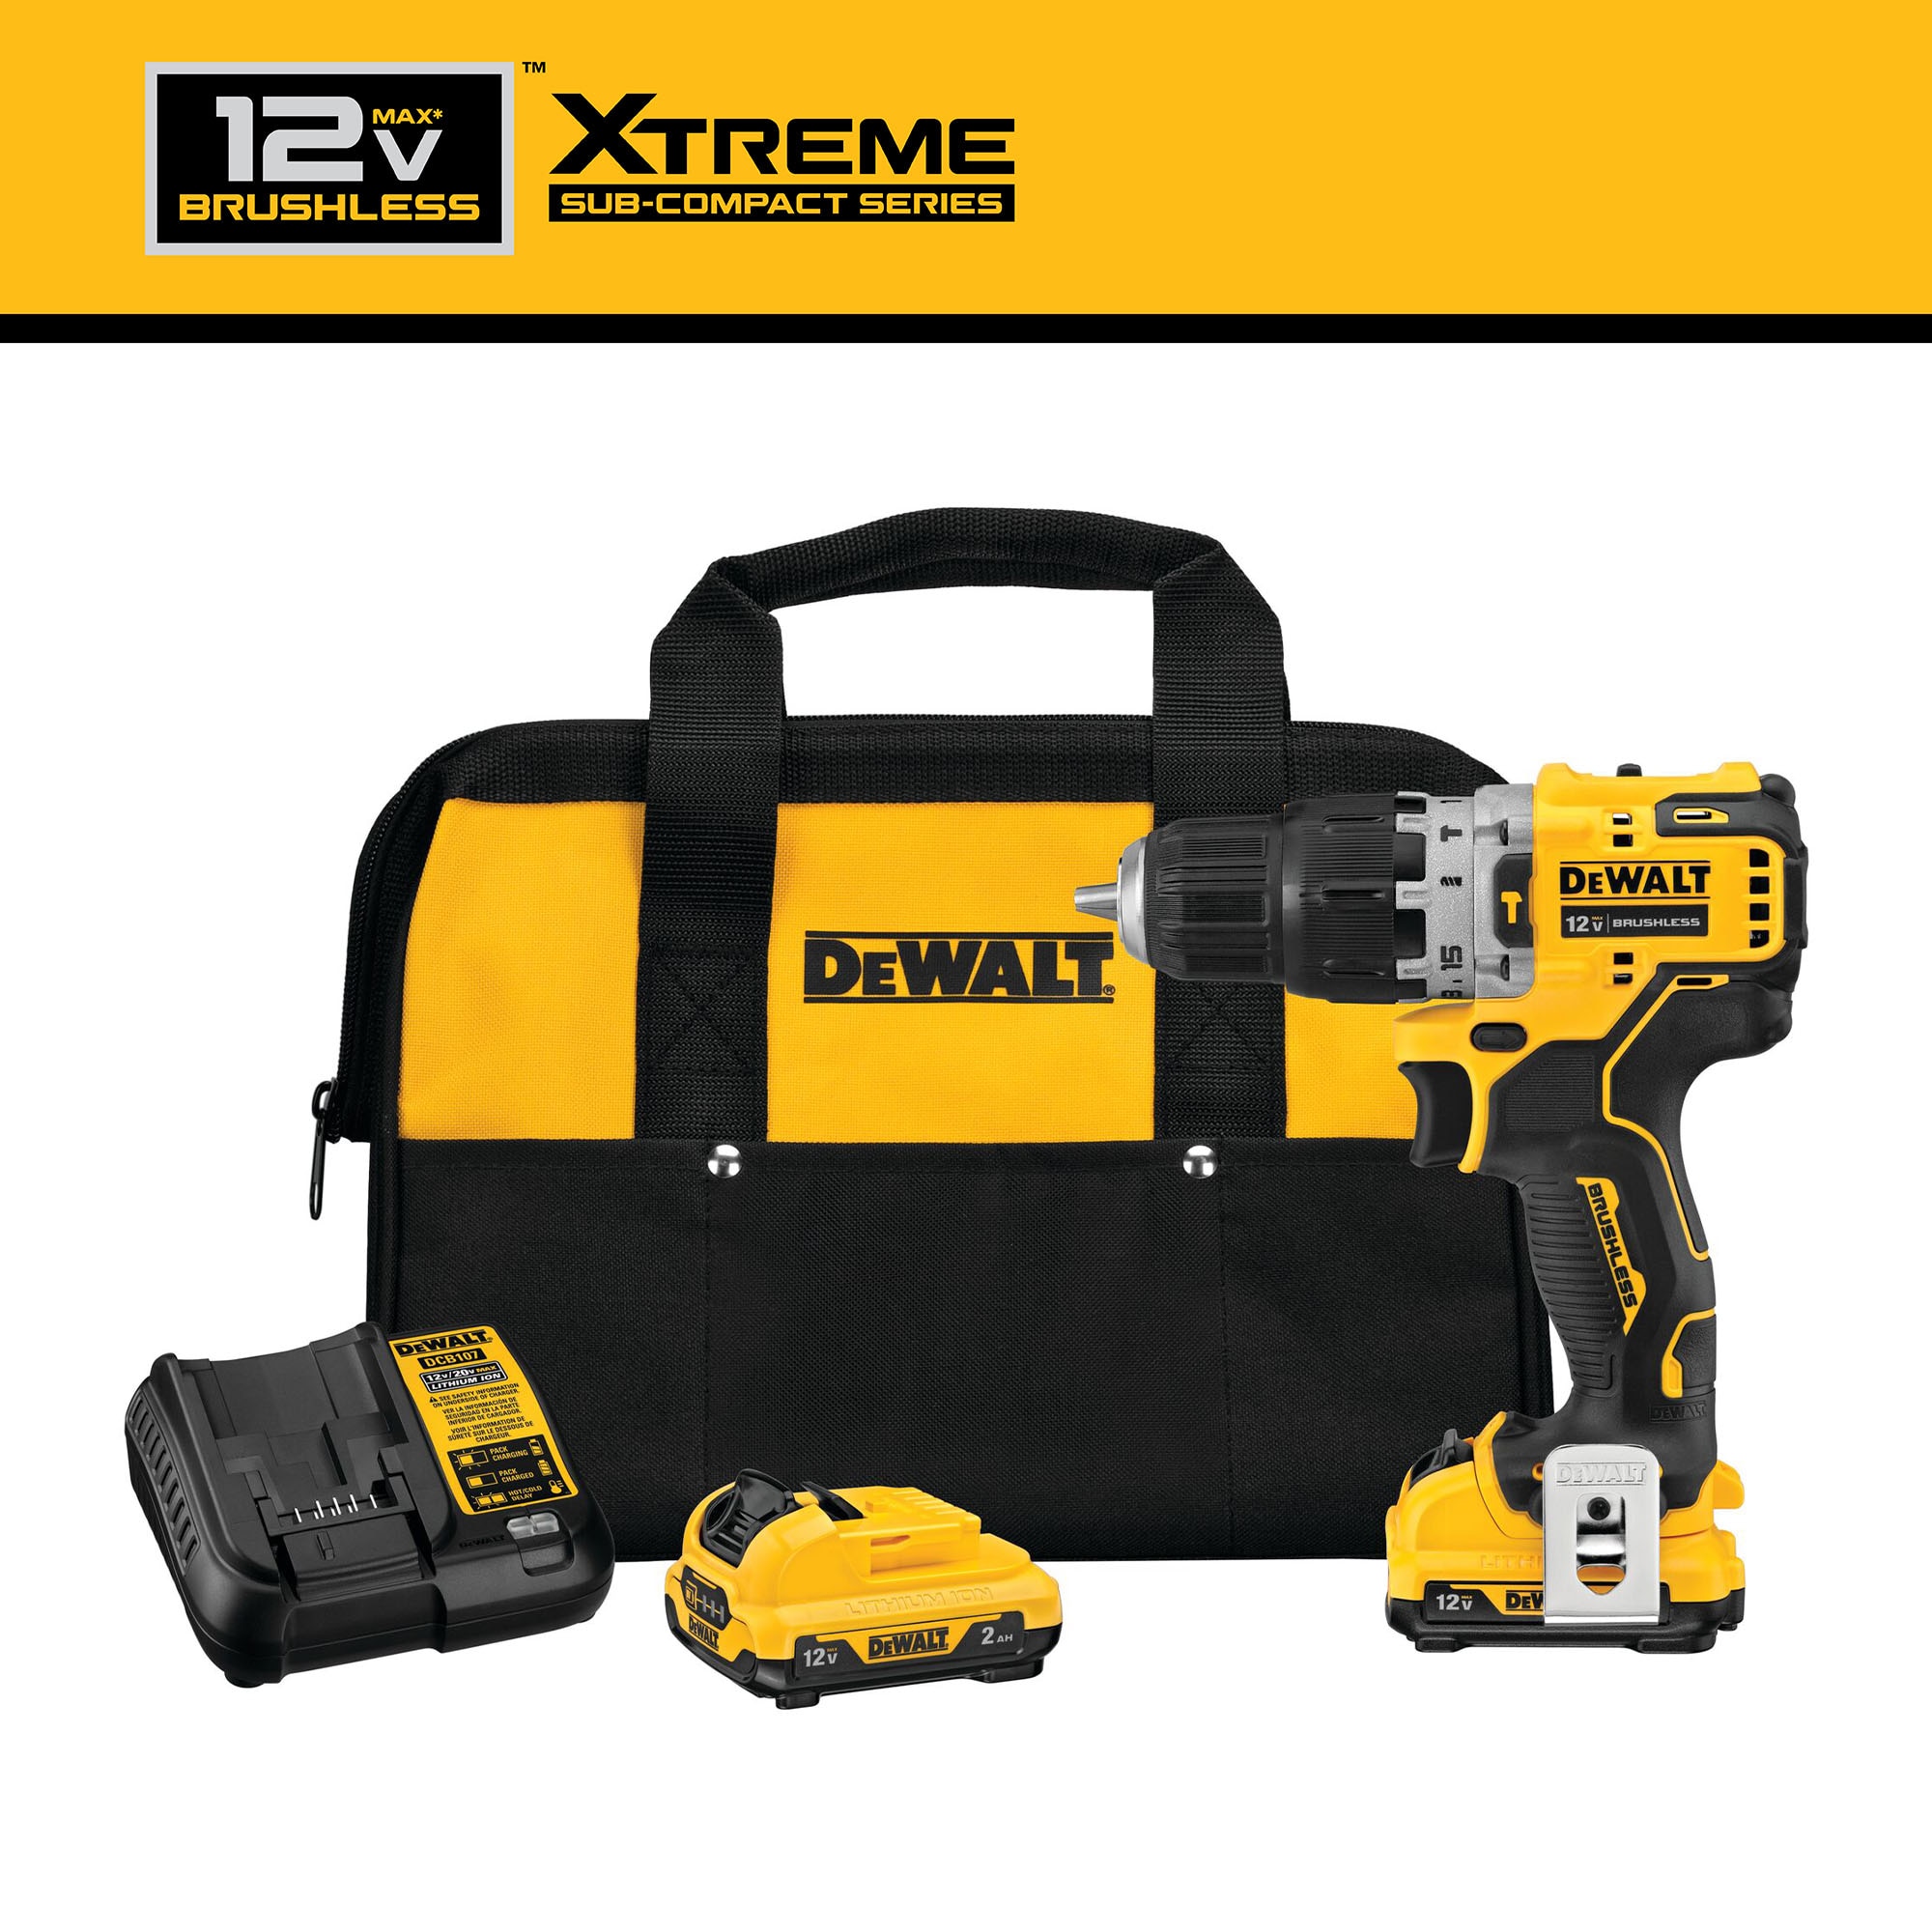 DEWALT XTREME 3/8-in 12-volt Max Variable Speed Brushless Cordless